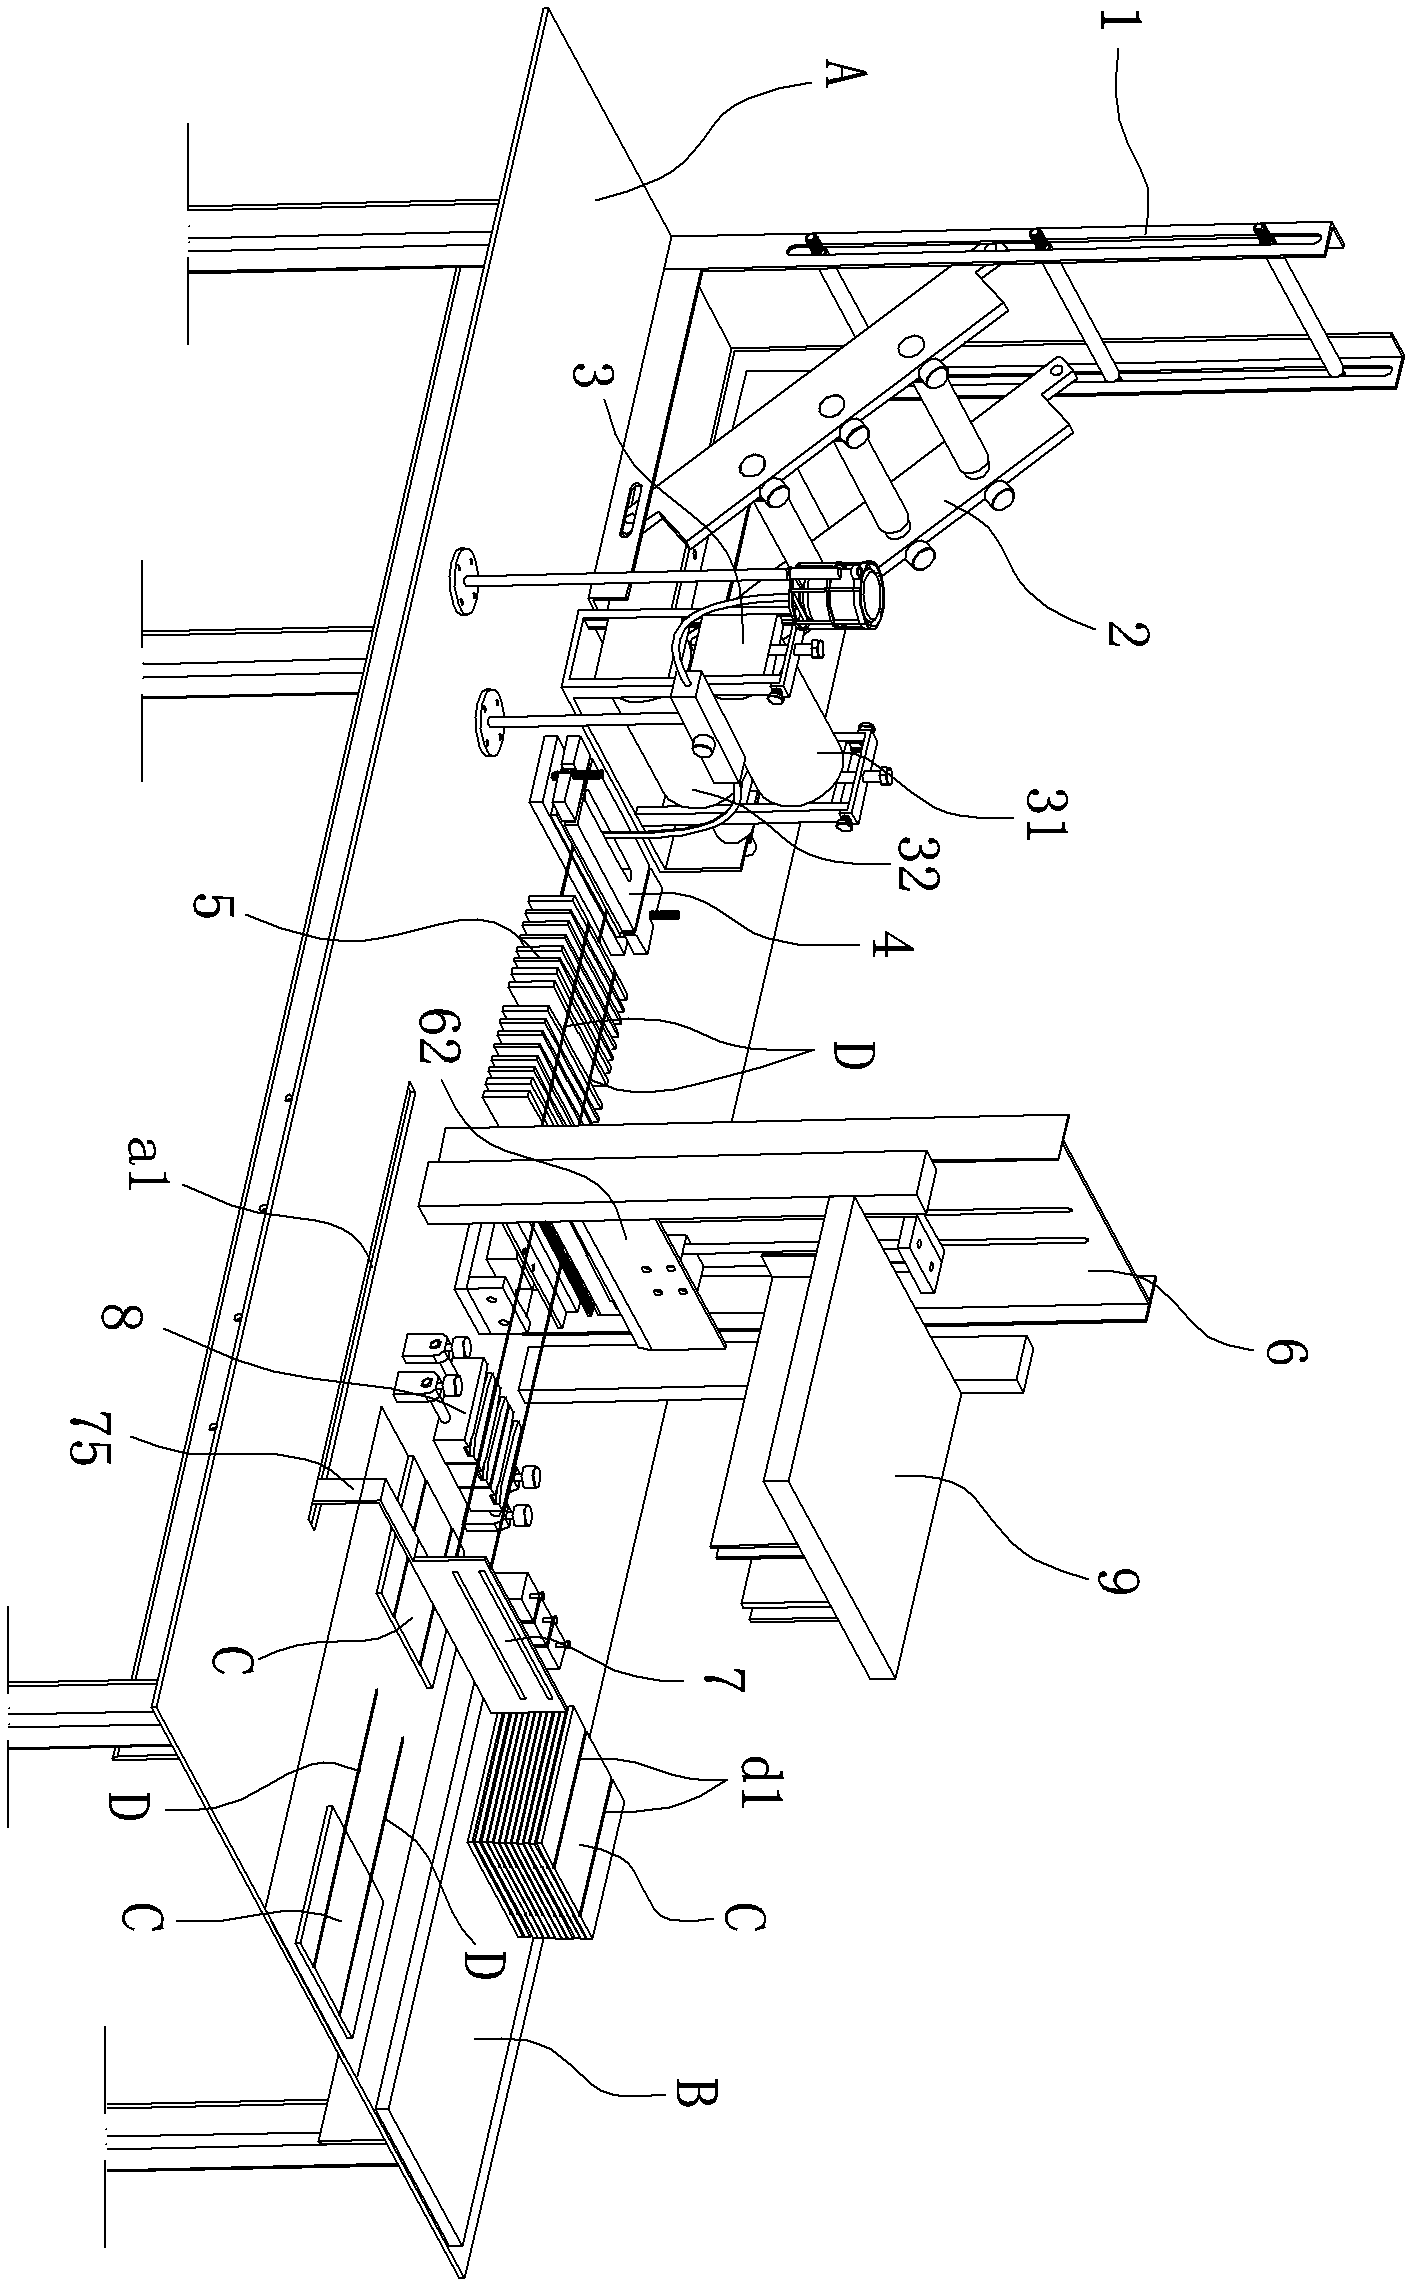 Semi-automatic single welding machine for solar cell slices